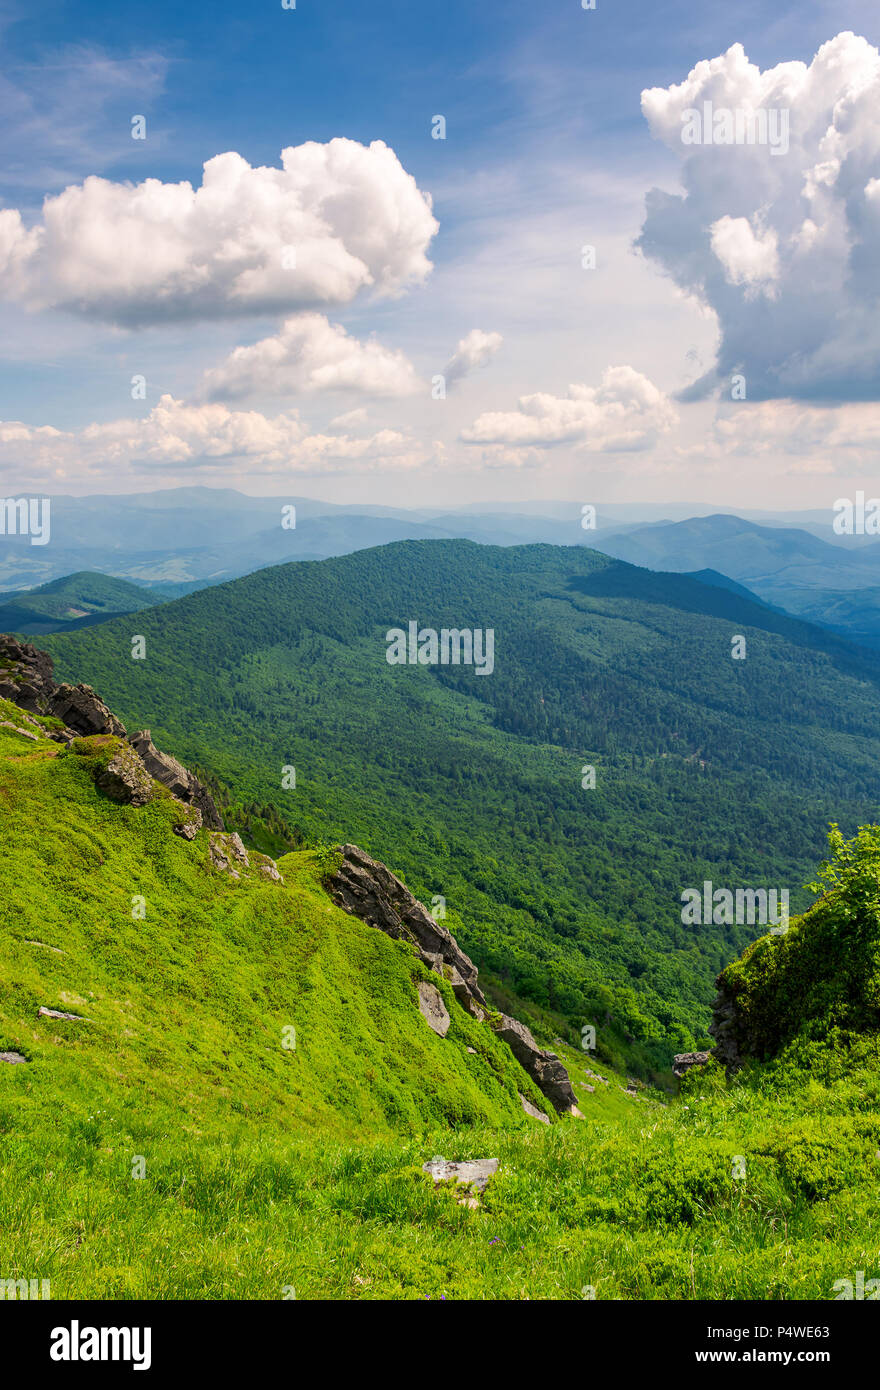 cliffs and grassy hills of Pikui mountain. beautiful view from the top. Borzhava ridge in the distance. lovely summer scenery with beautiful cloudscap Stock Photo